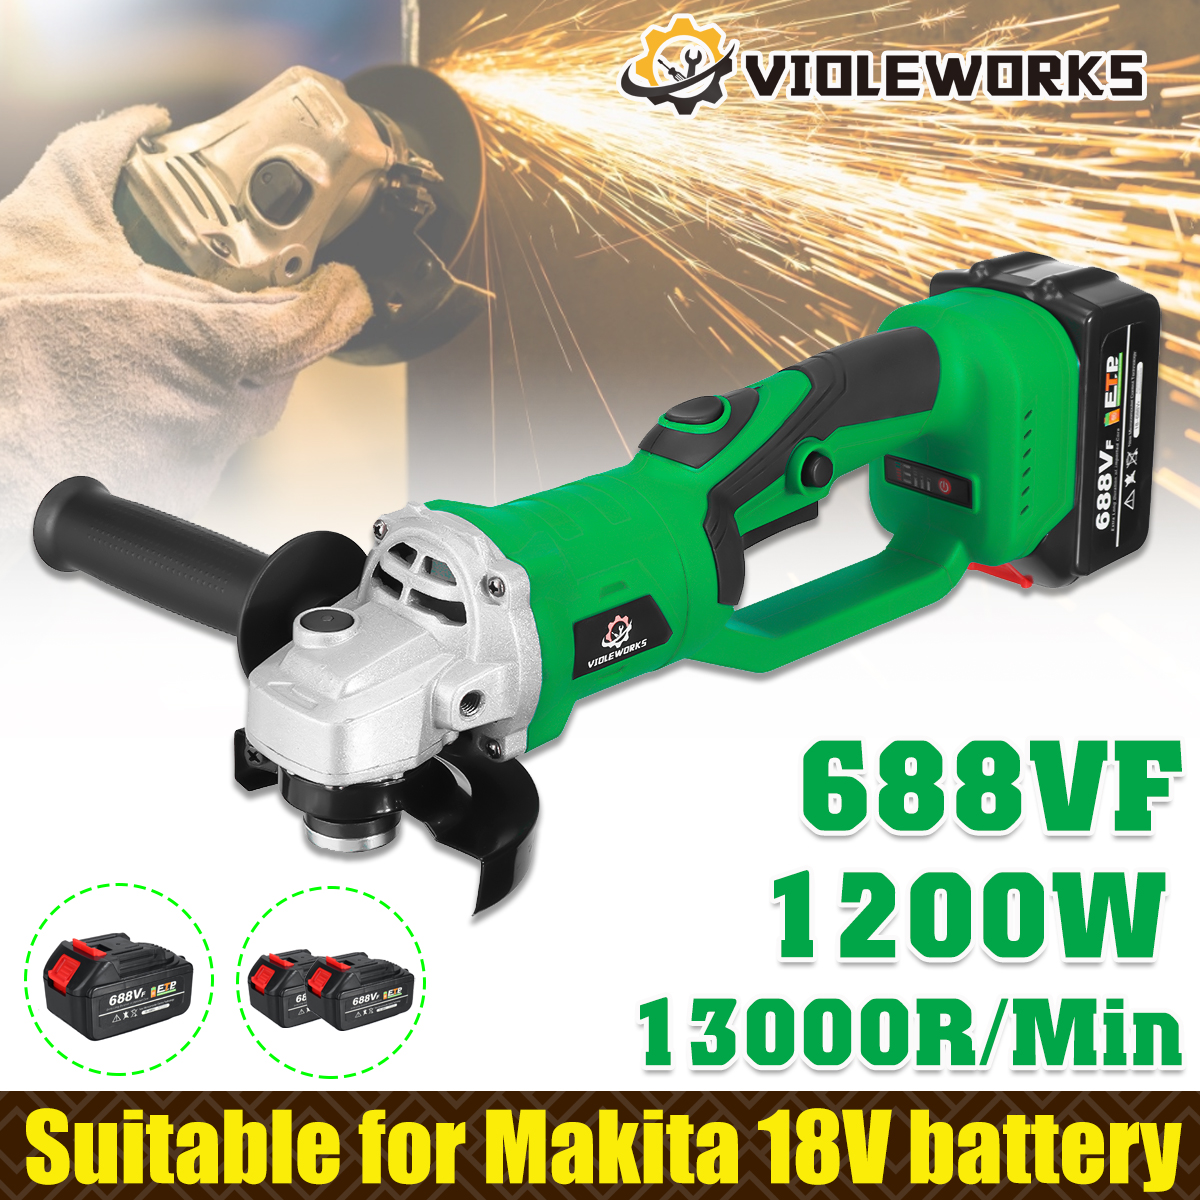 688VF-1200W-100mm-Brushless-Electric-Angle-Grinder-180deg-Rotation-3-Gears-Cutting-Grinding-Tool-Ind-1859330-2